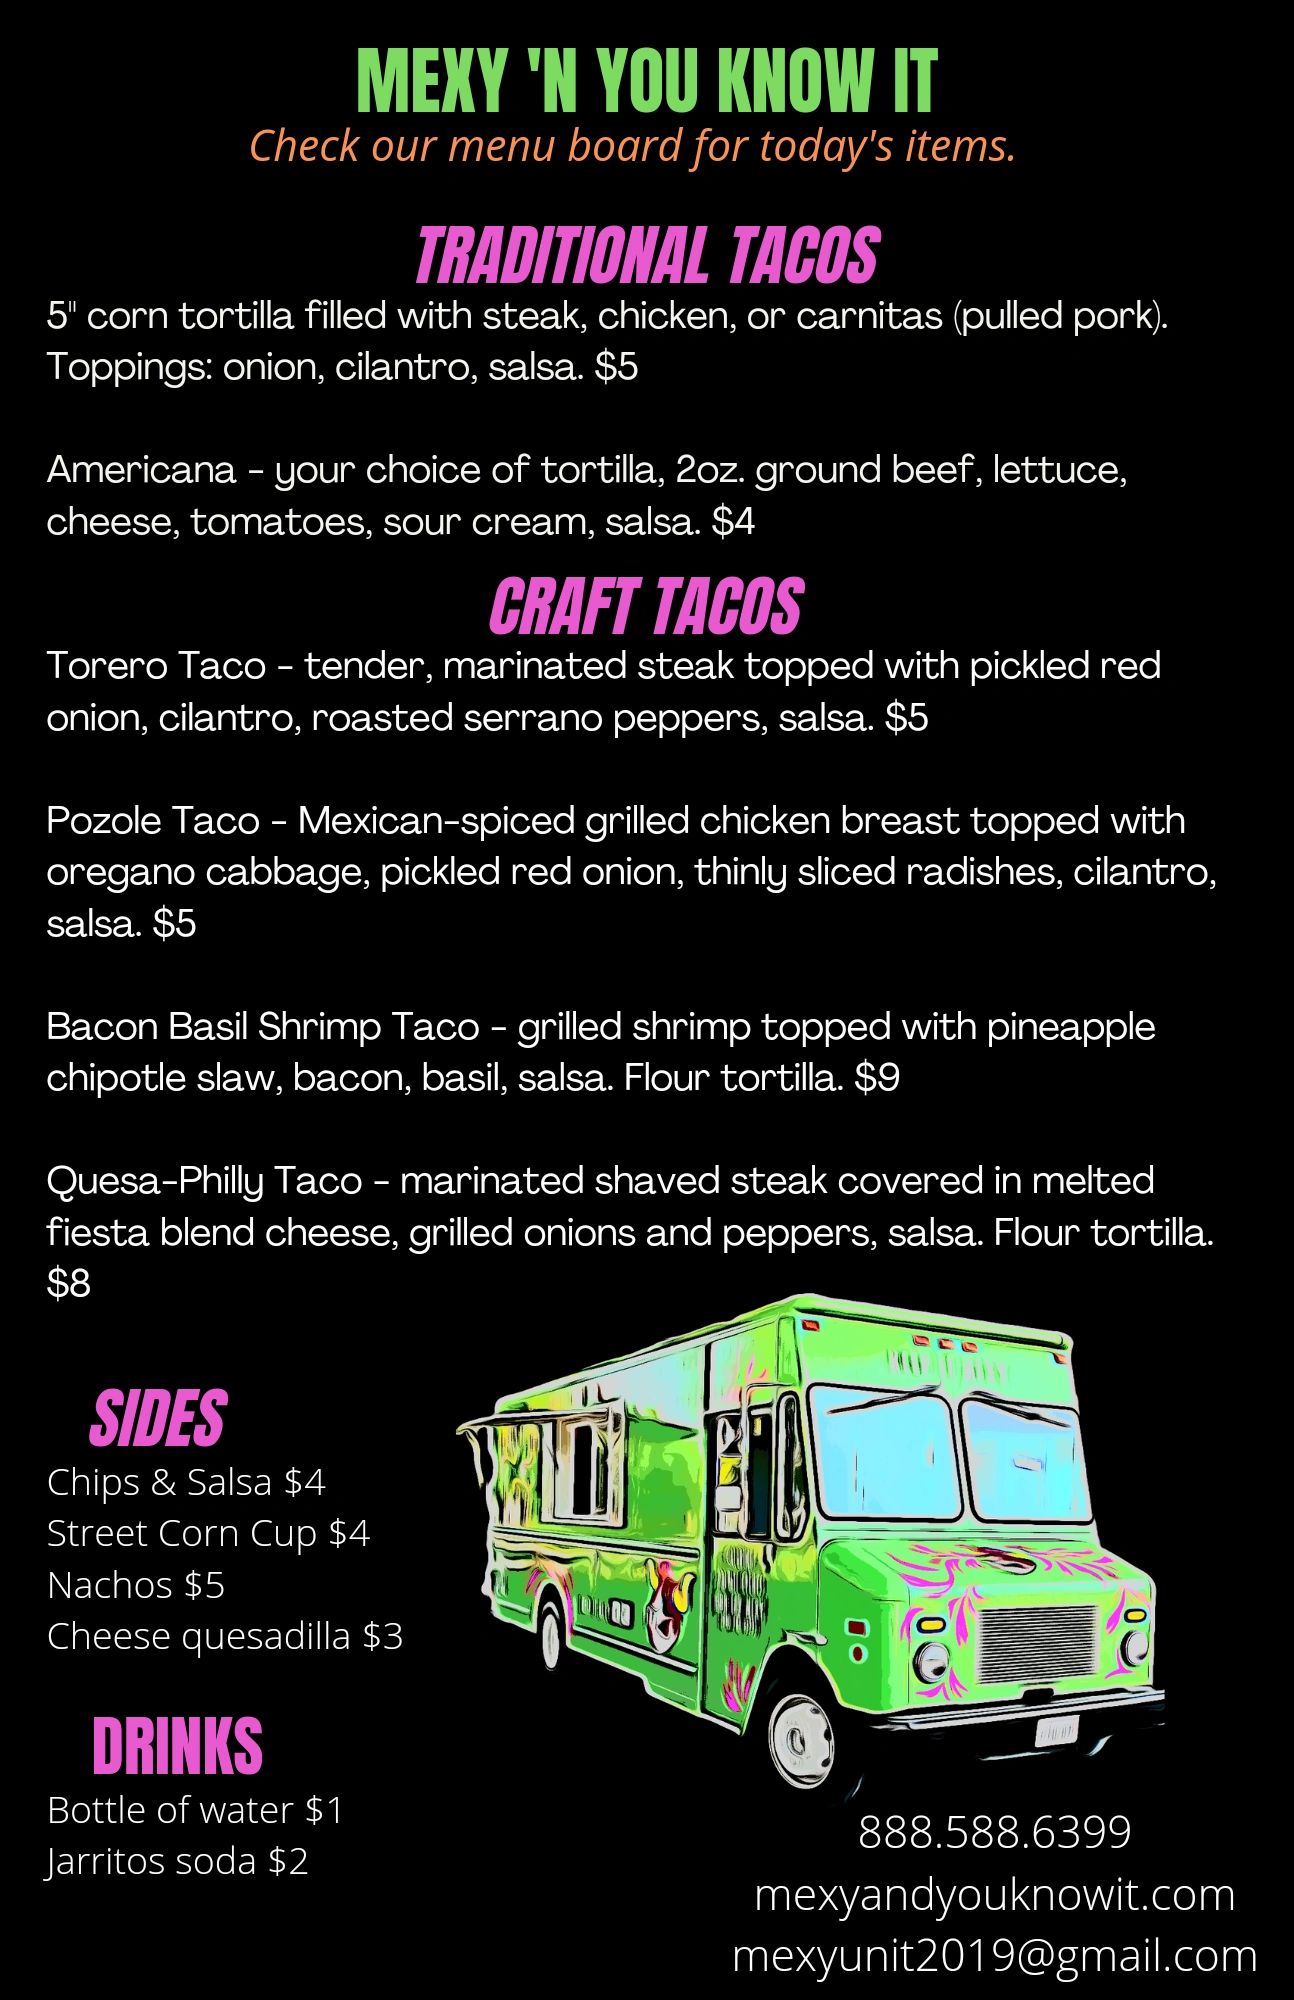 Food truck menu, tacos, taco truck, catering, wedding catering